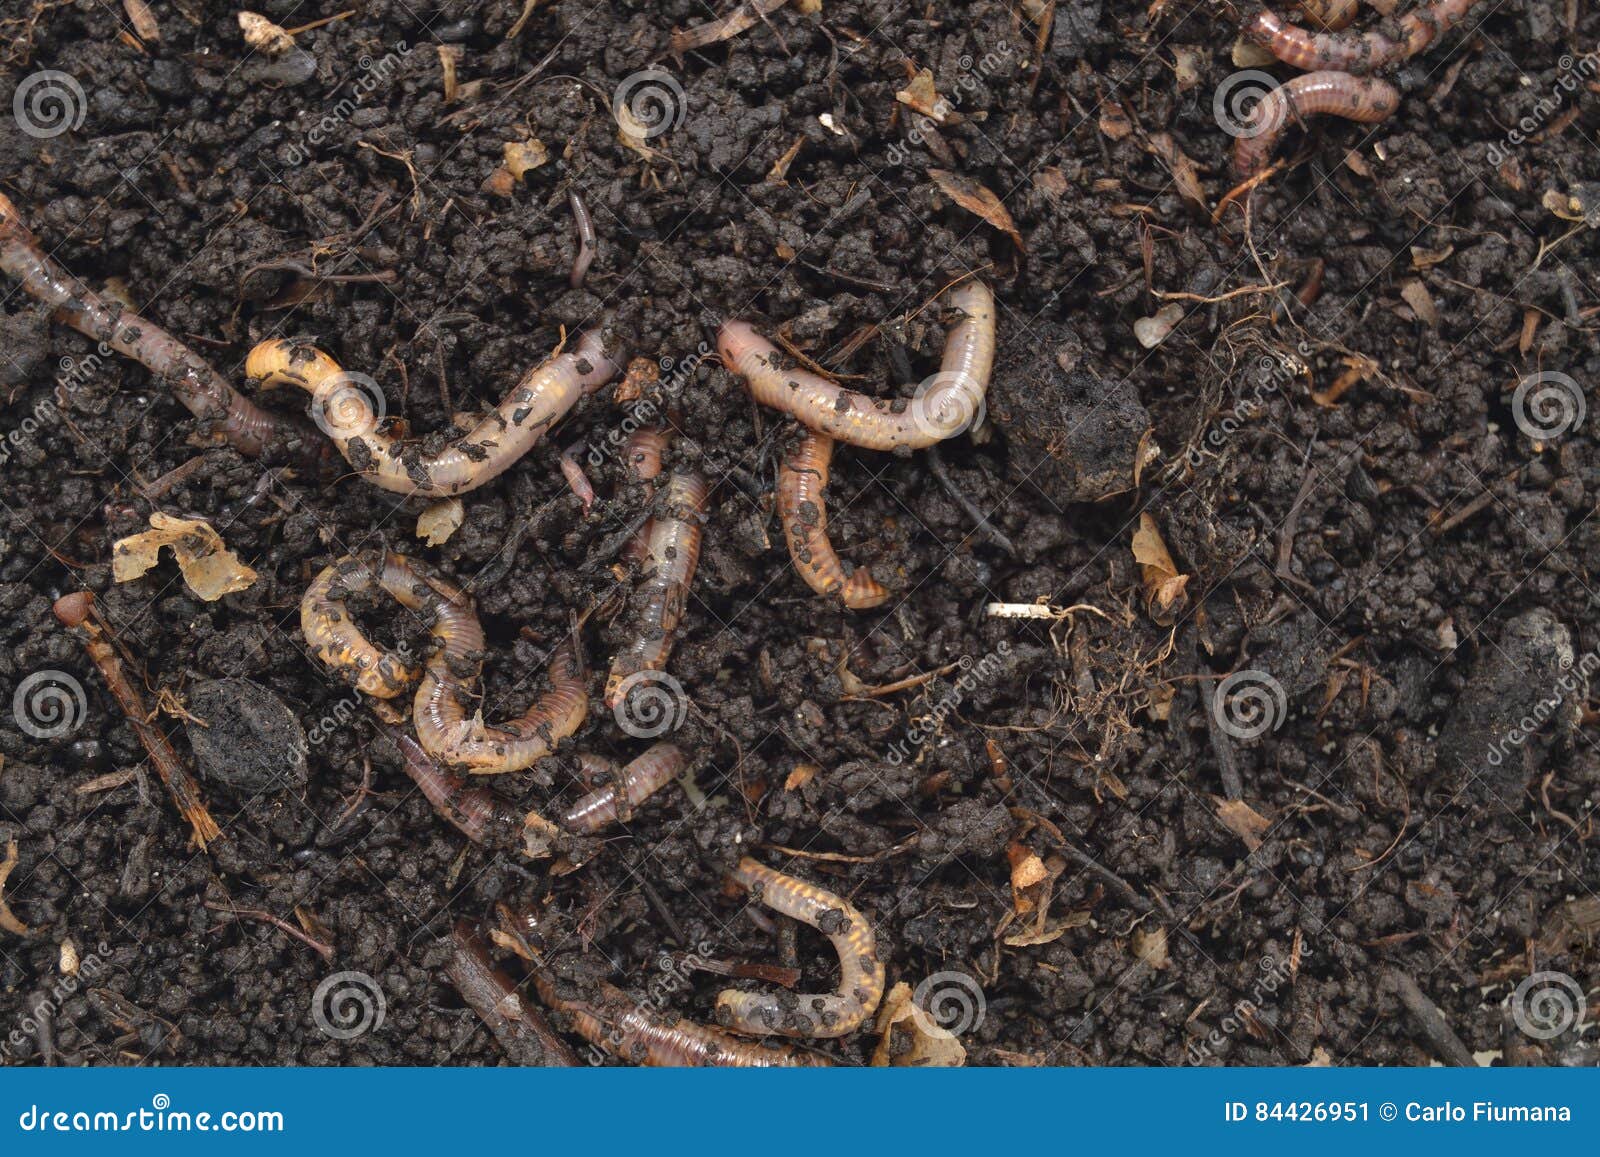 humus produced by earthworms californian